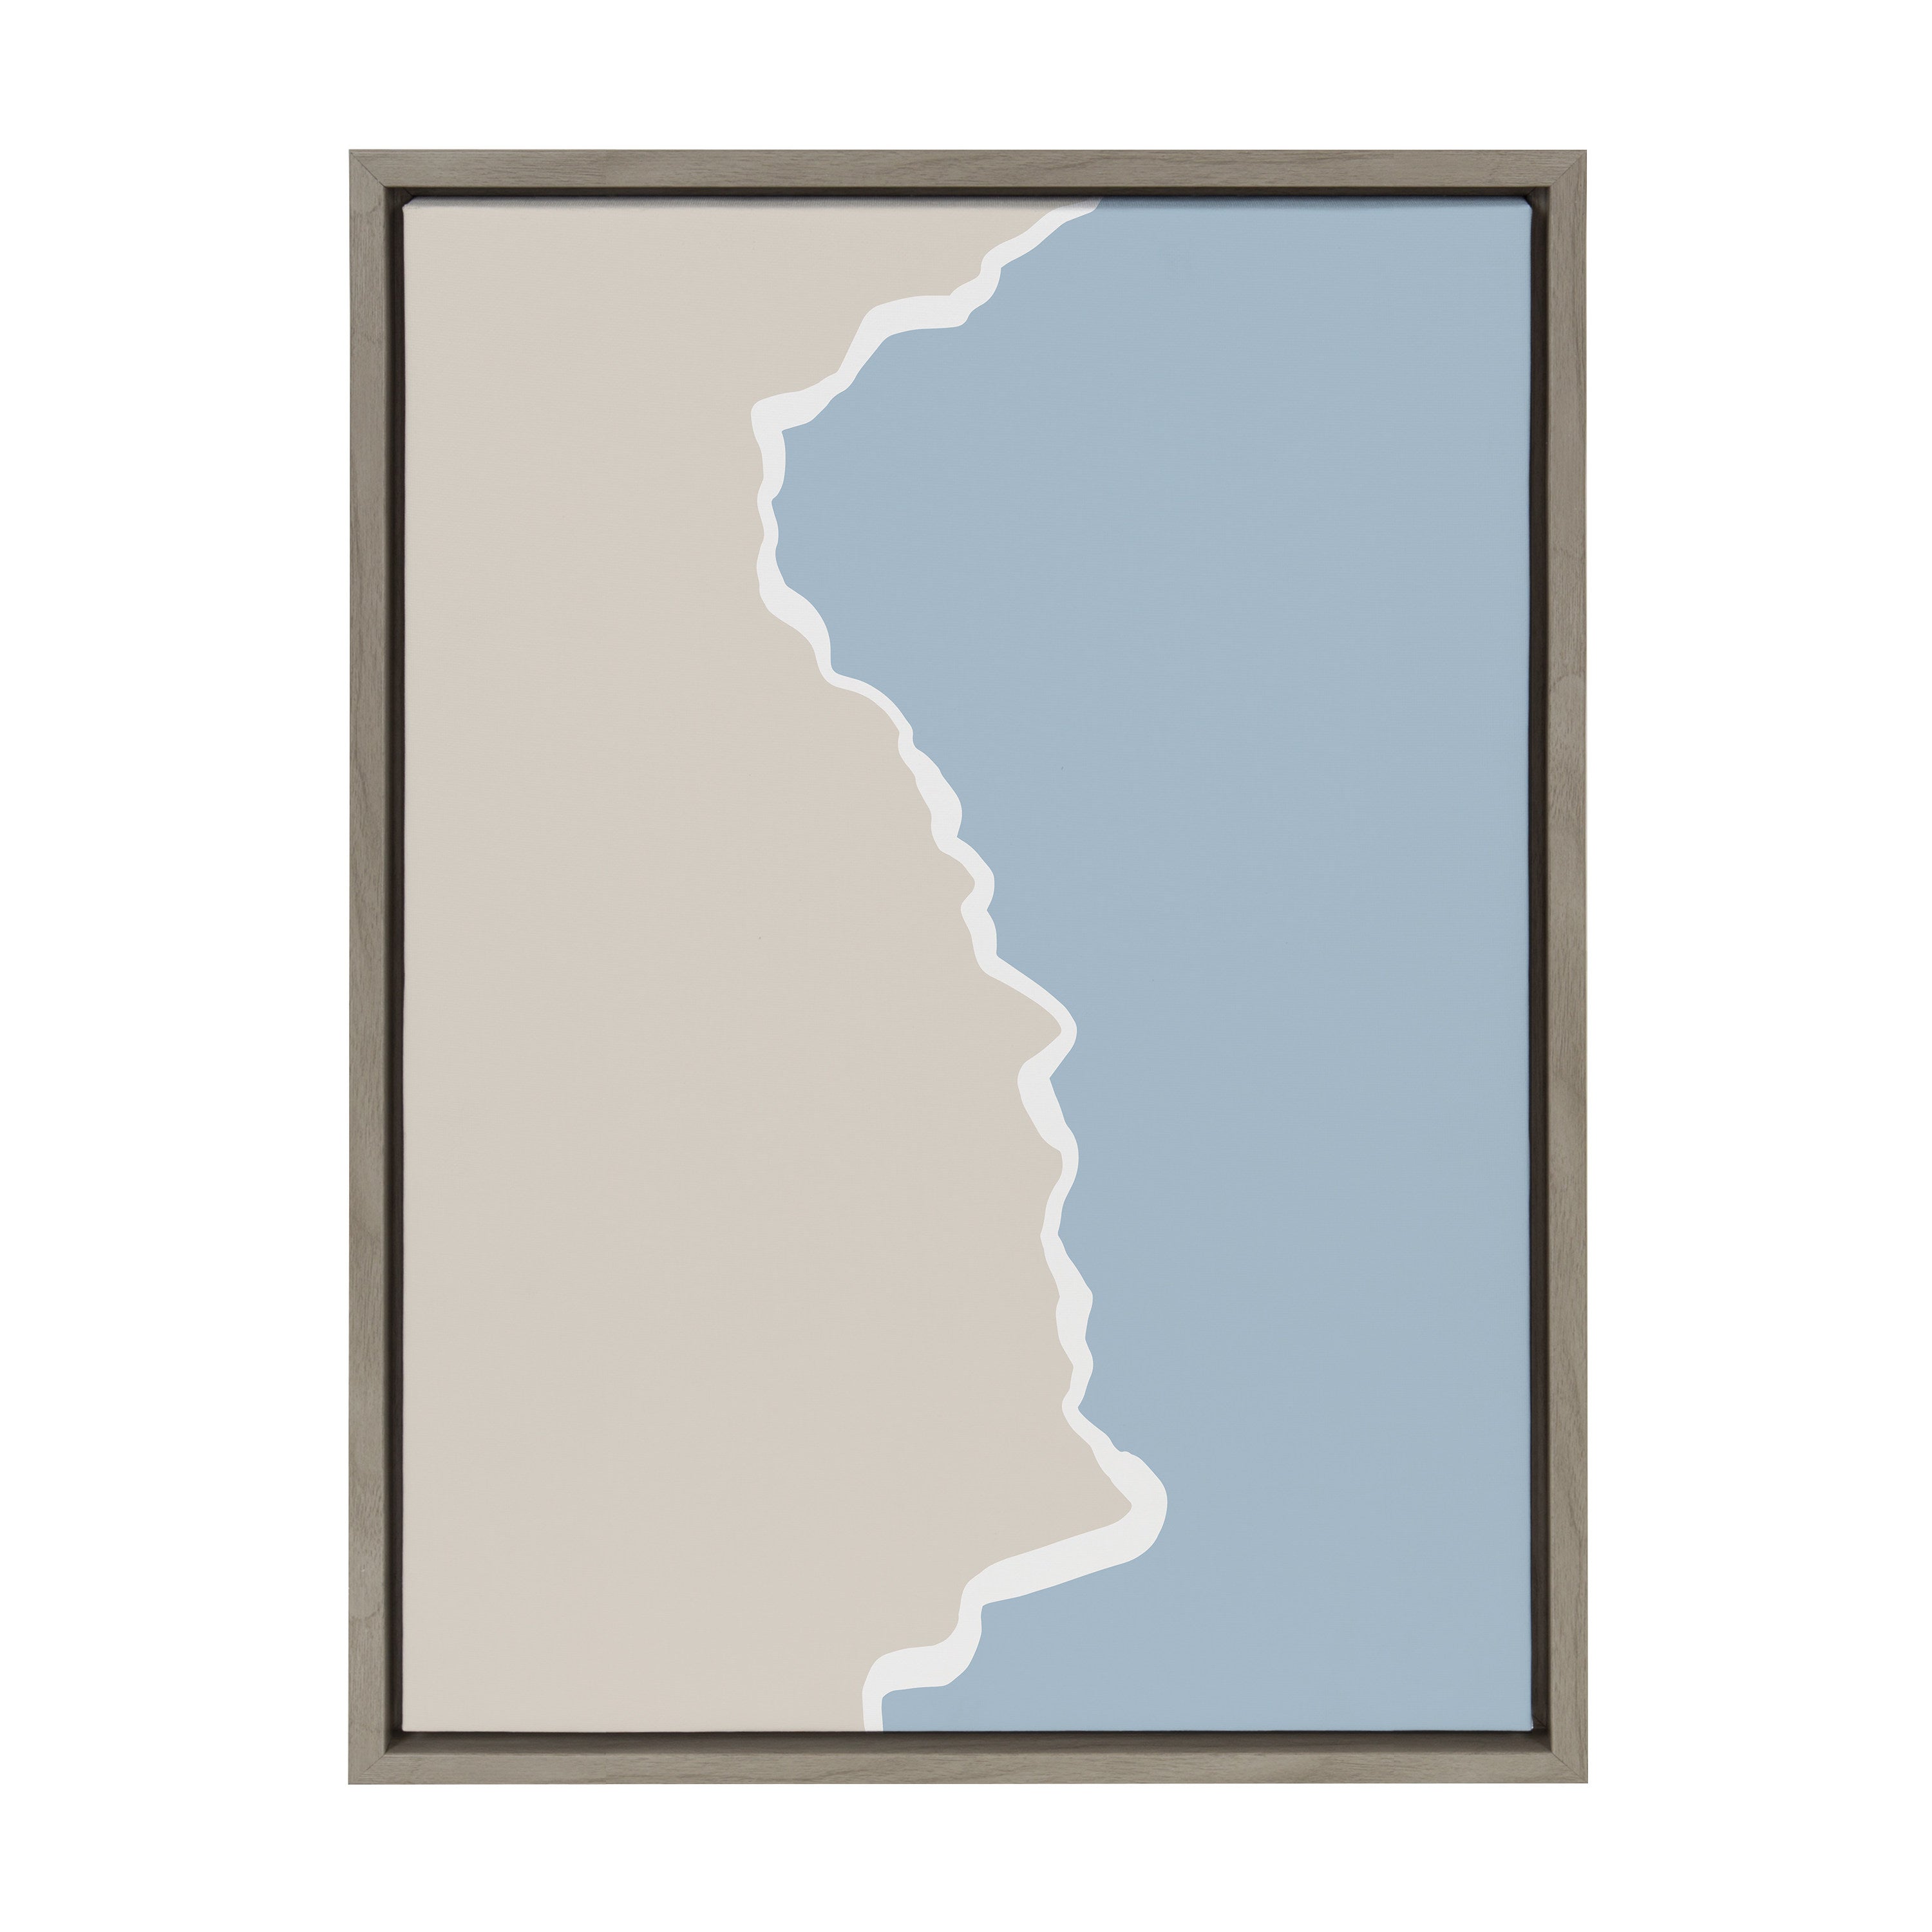 Sylvie Muted Abstract Landscape Beige and Blue Framed Canvas by The Creative Bunch Studio